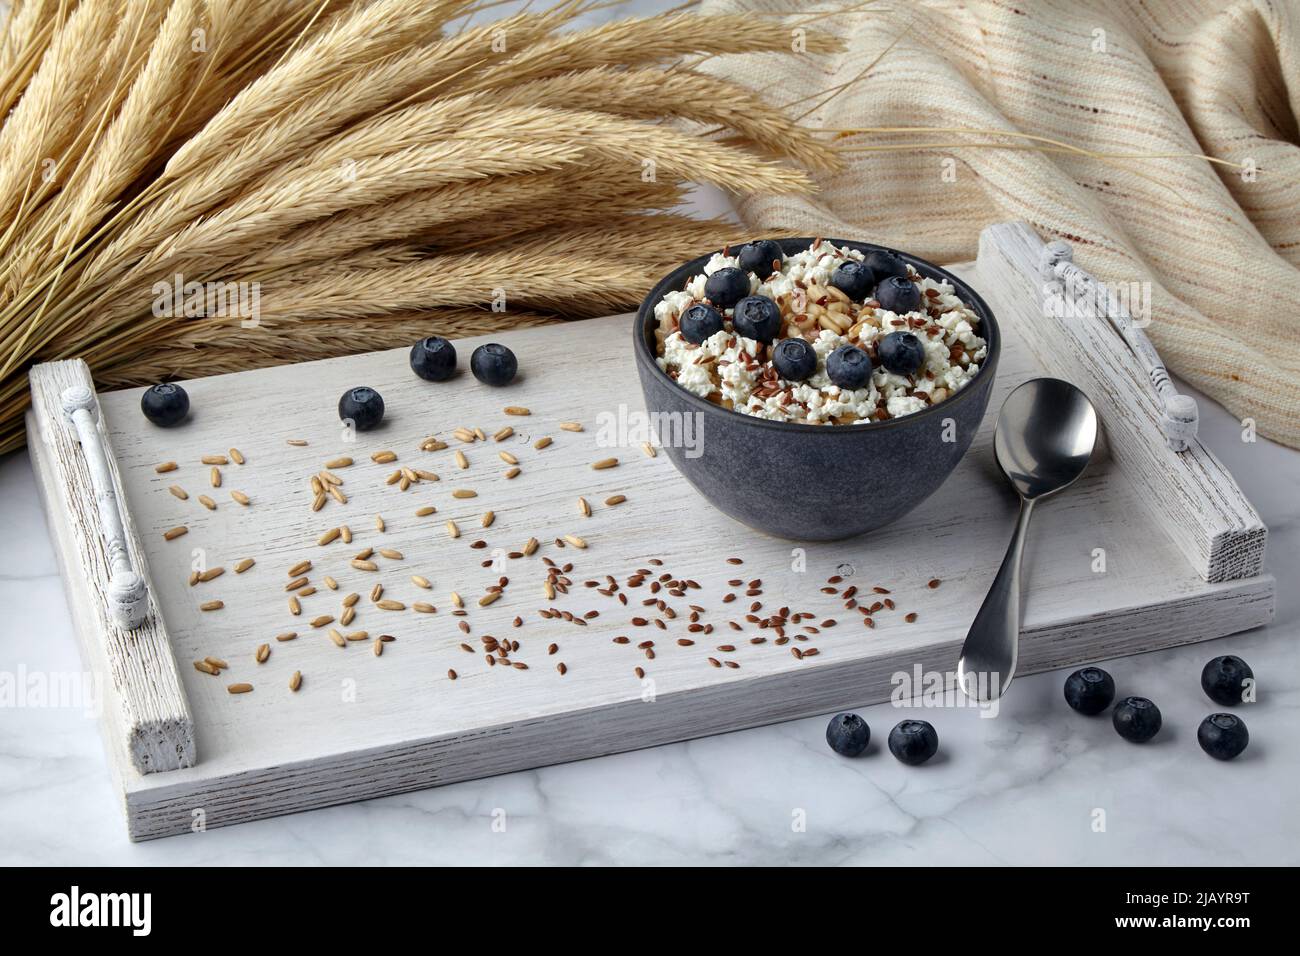 Whole grain oatmeal with blueberries, flax seeds and cottage cheese on a white painted tray surrounded by ears of corn and a tea towel. Energizing bre Stock Photo